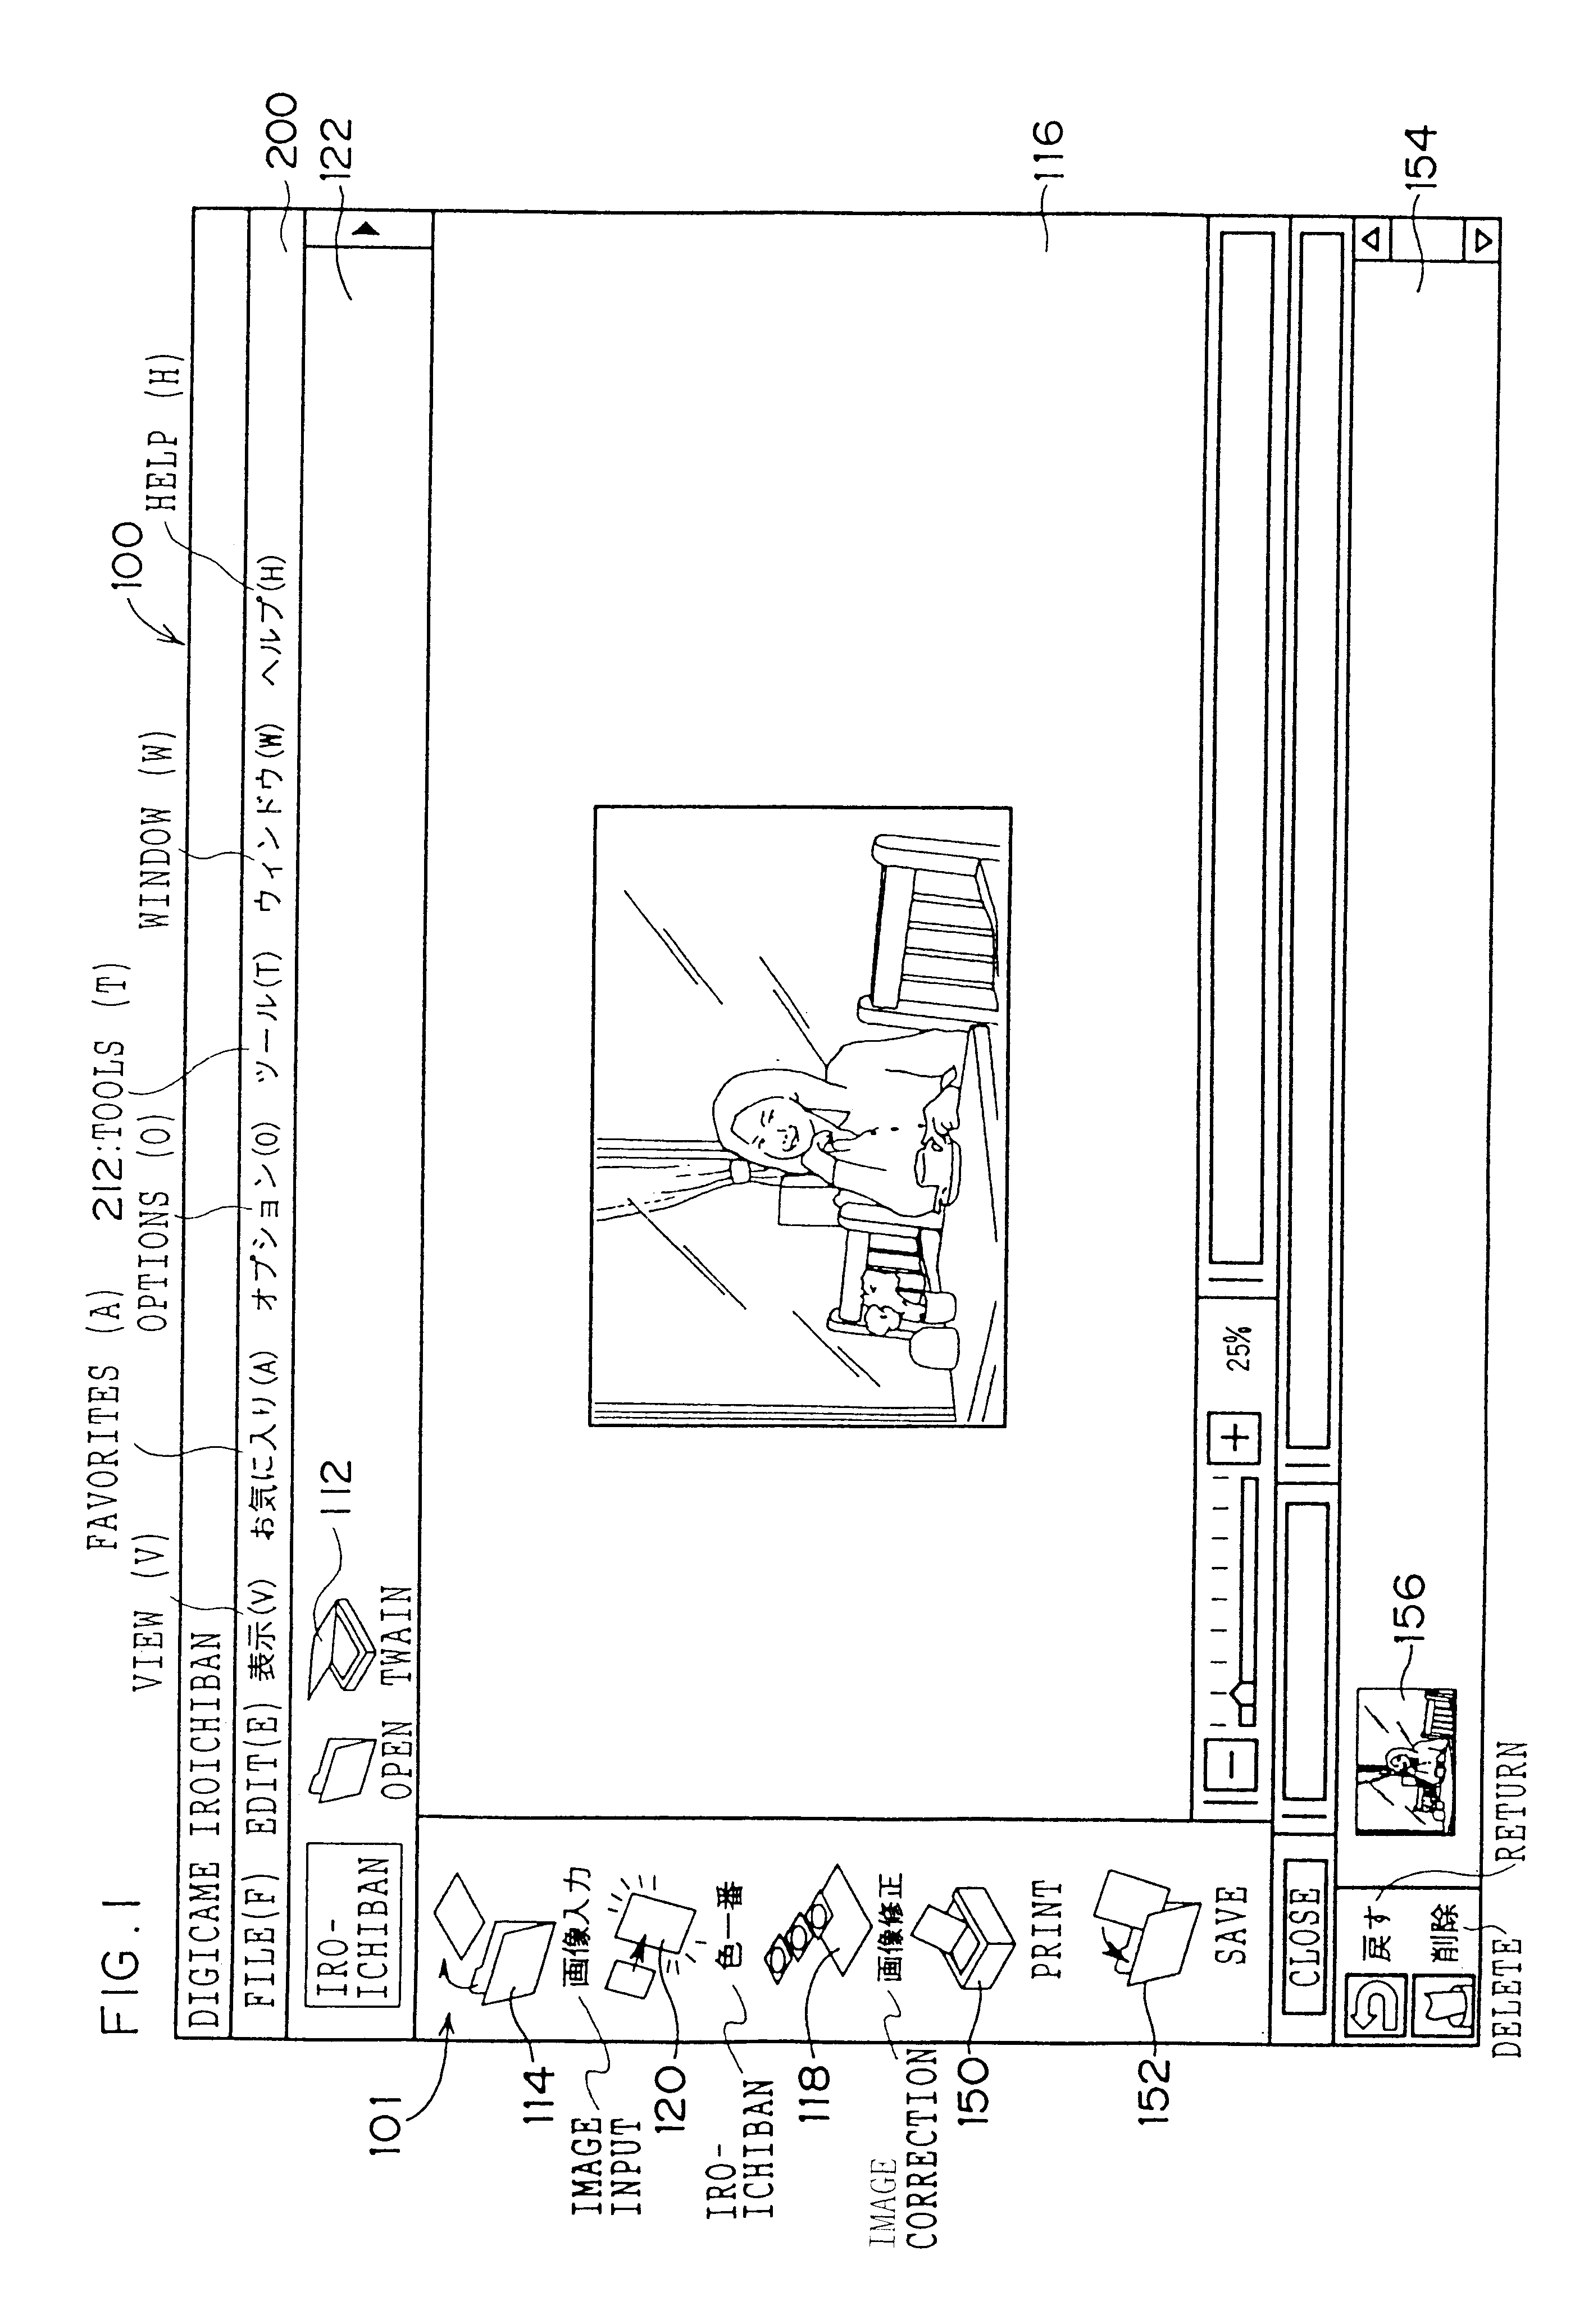 Method and device for displaying a history of image processing information